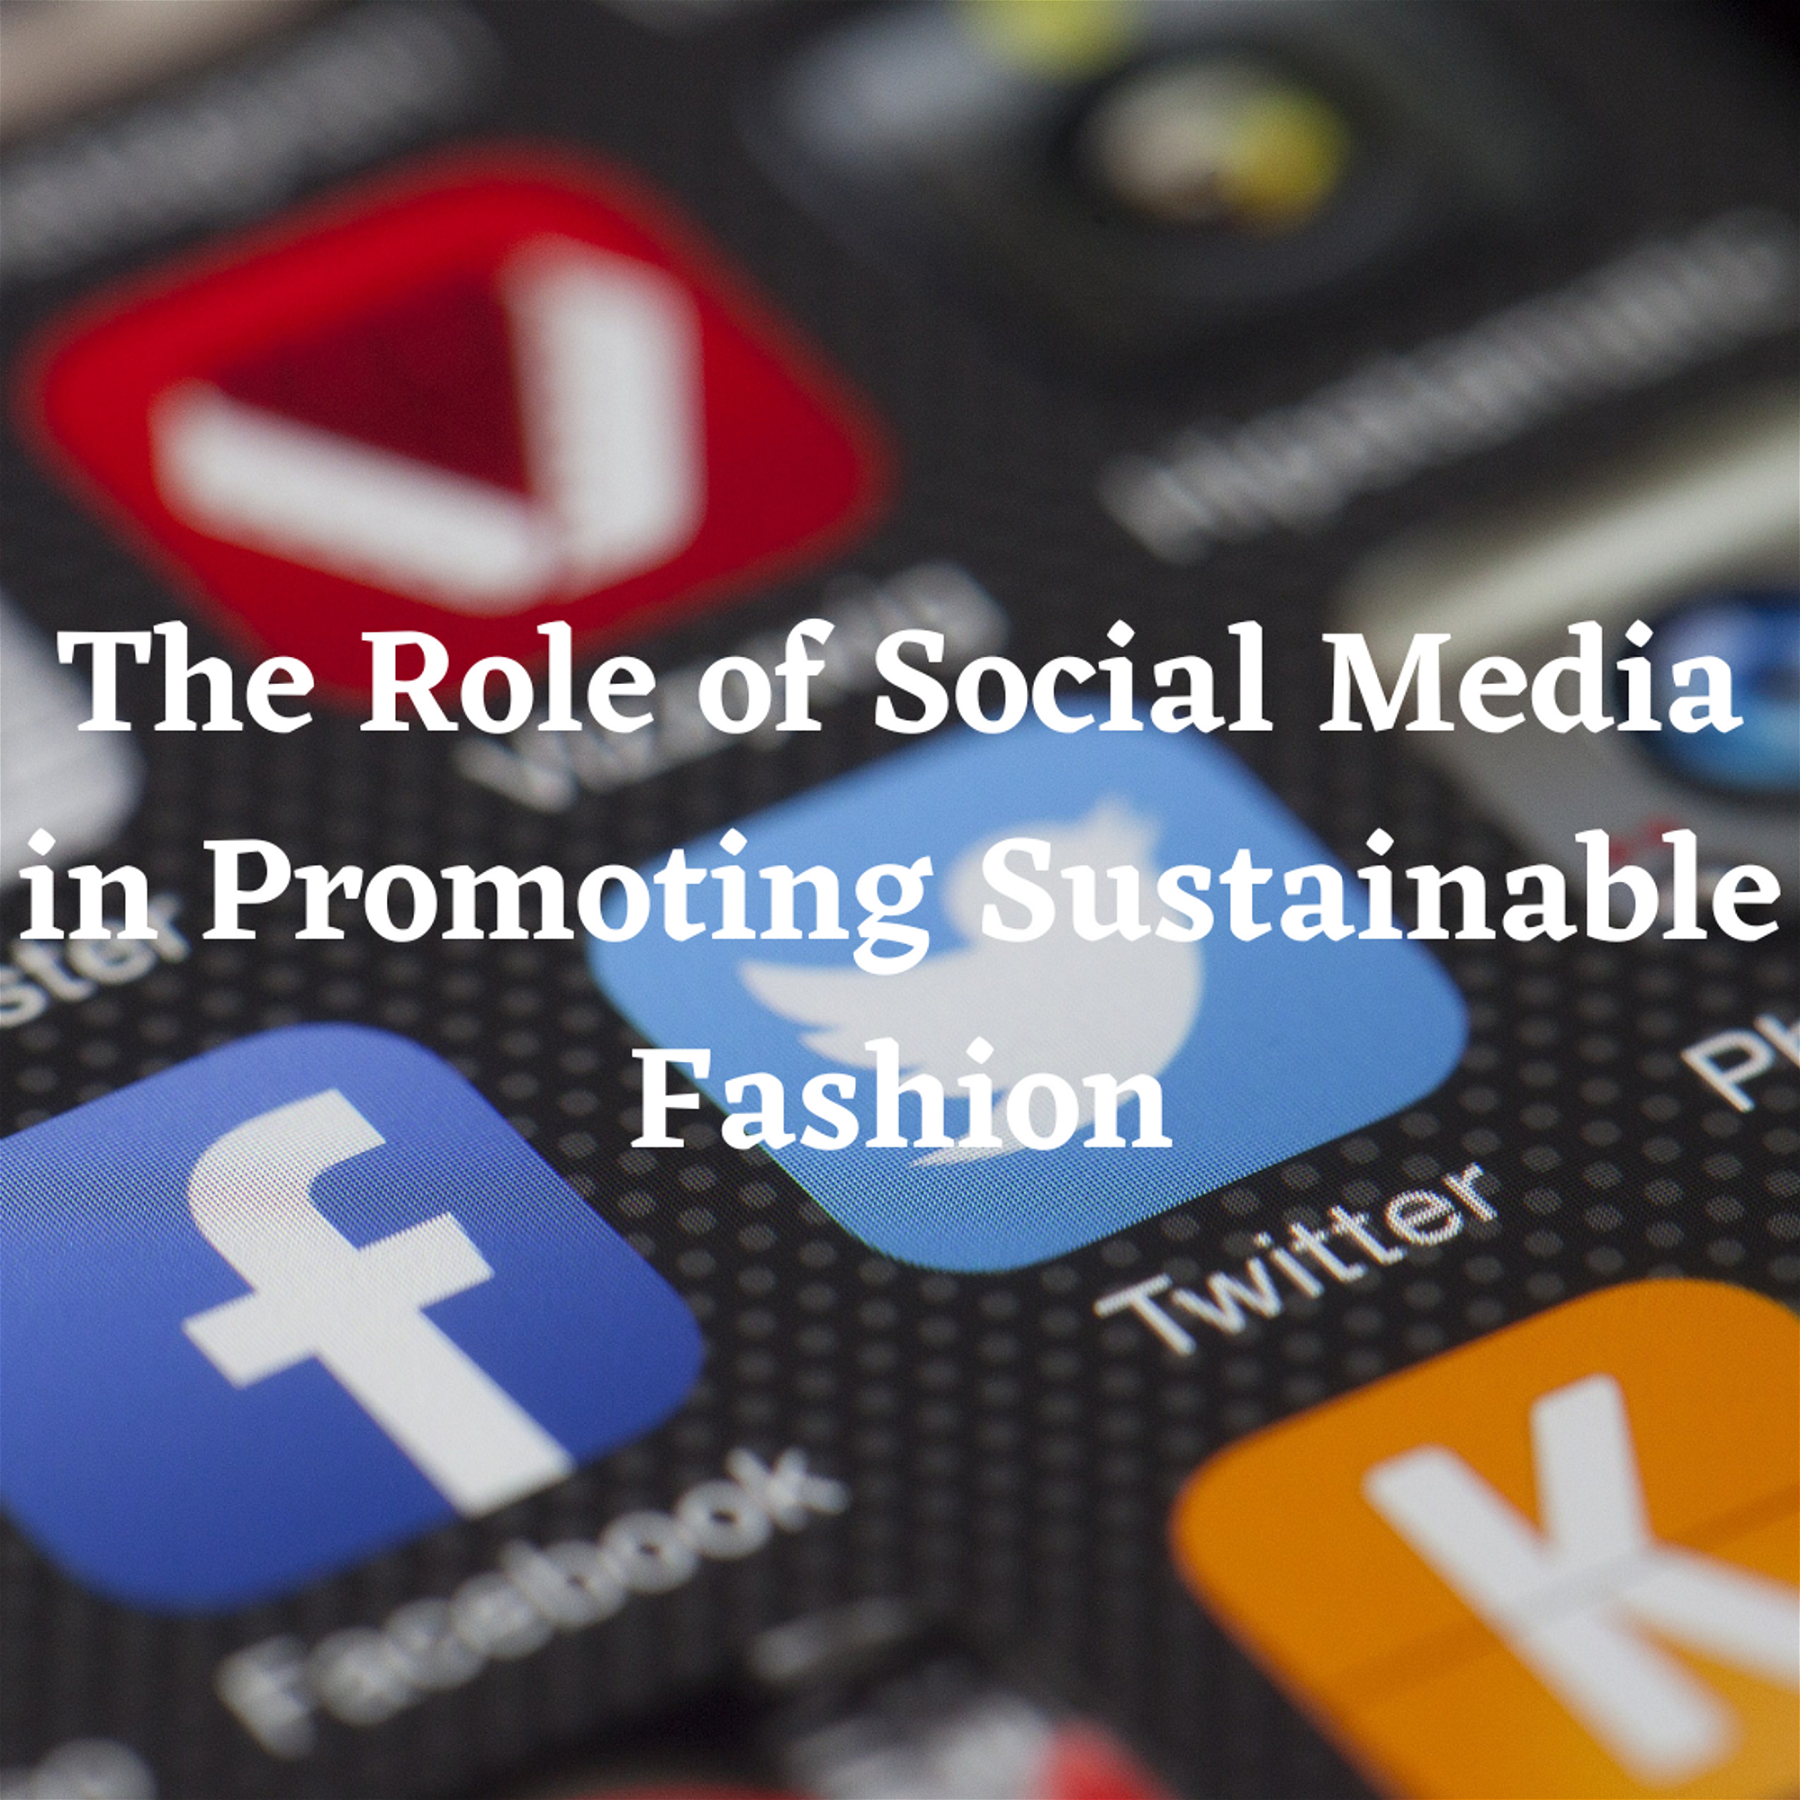 The Role of Social Media in Promoting Sustainable Fashion